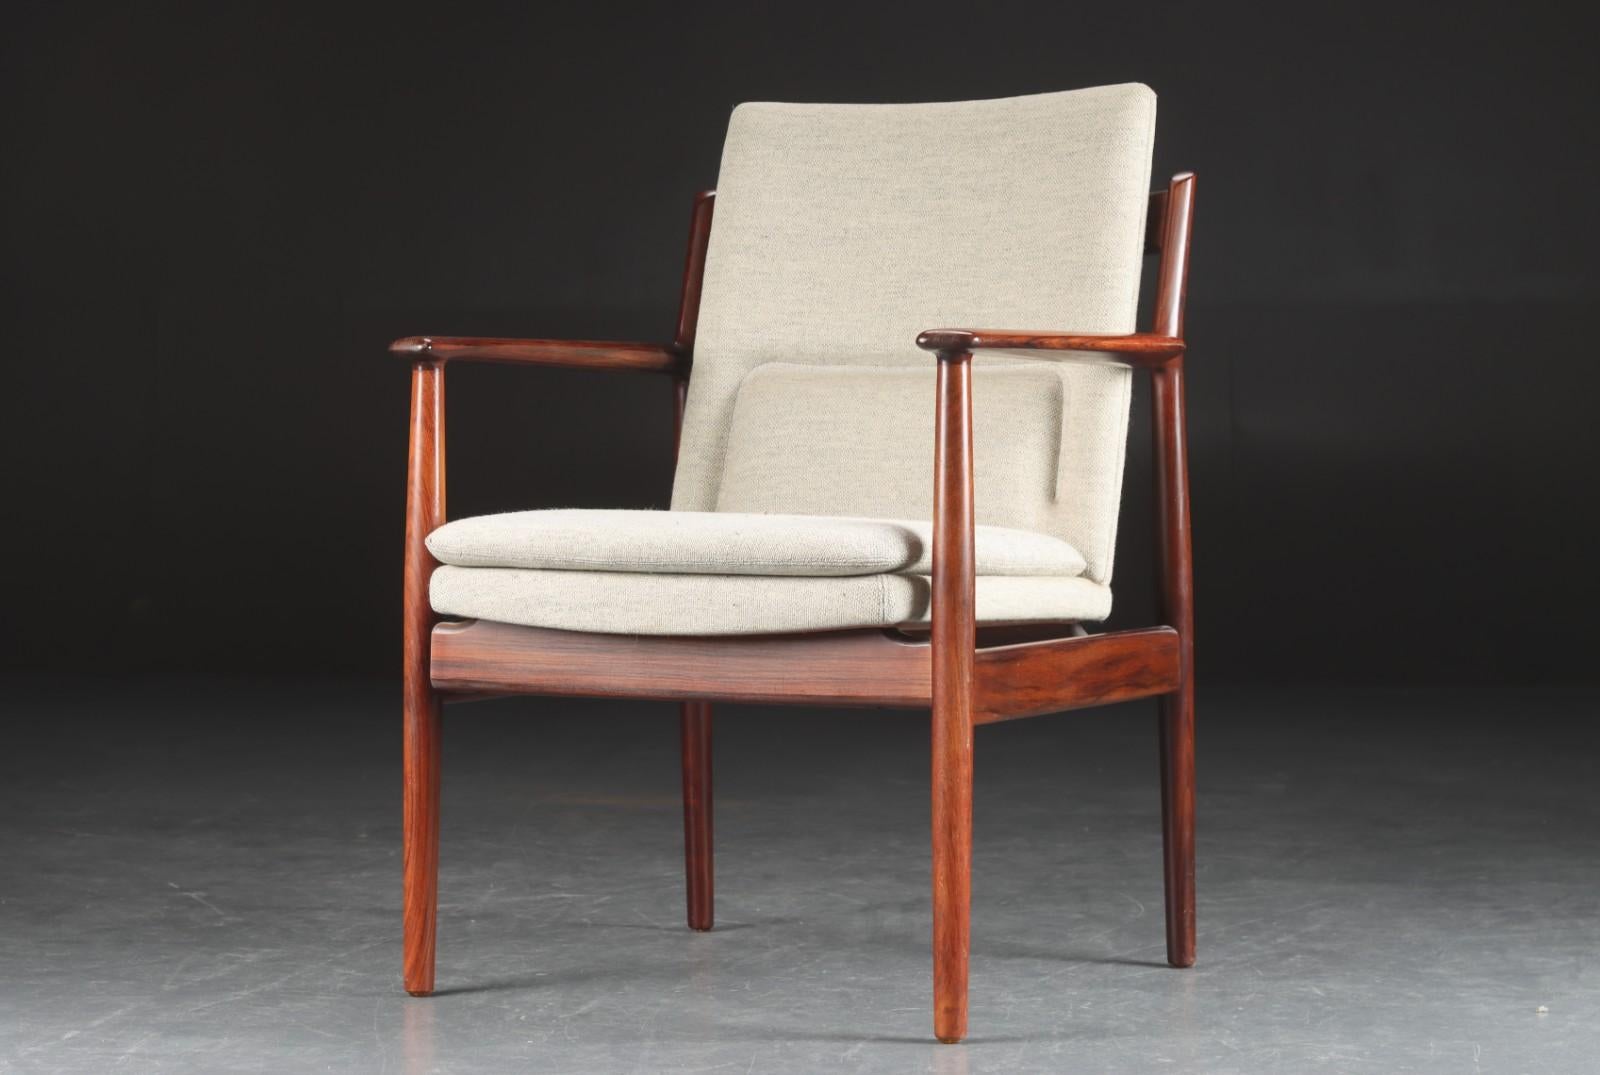 Armchair designed by Arne Vodder and manufactured by Sibast Mobler, Denmark 1960., Model 431. The chair have a solid rosewood frame and light grey wool upholstry. The upholstery is still original and in very good condition. The chairs seat